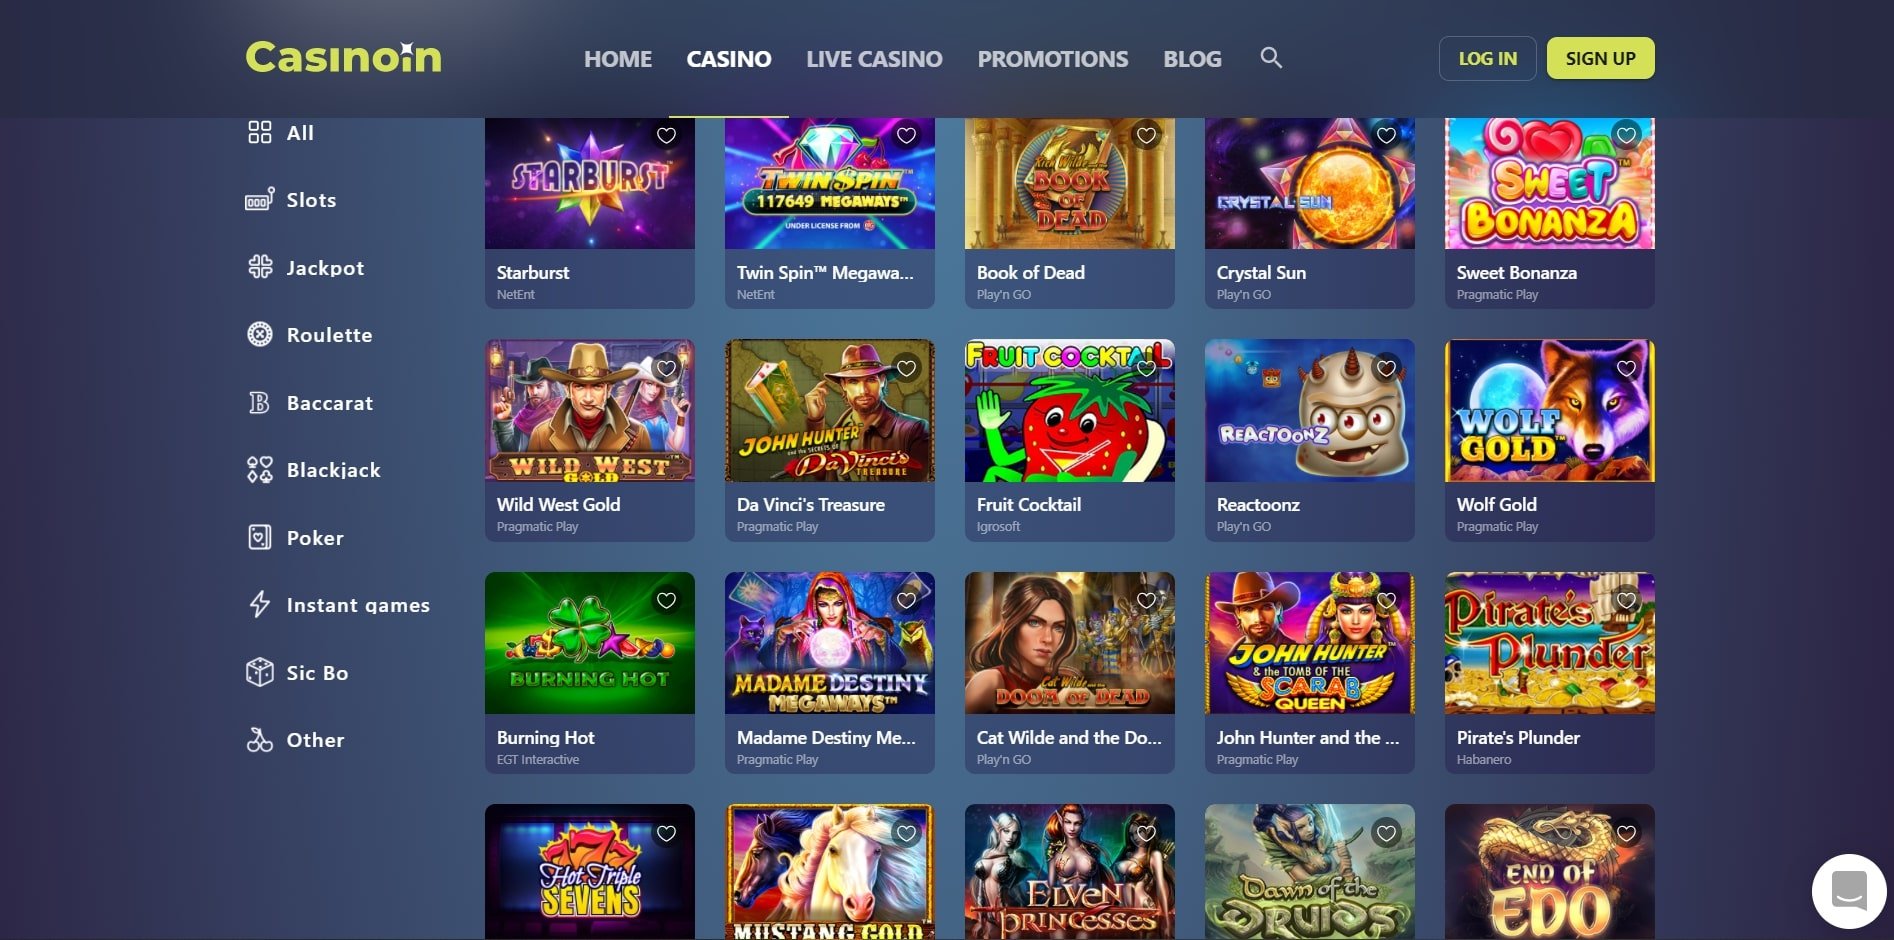 Casinoin Games